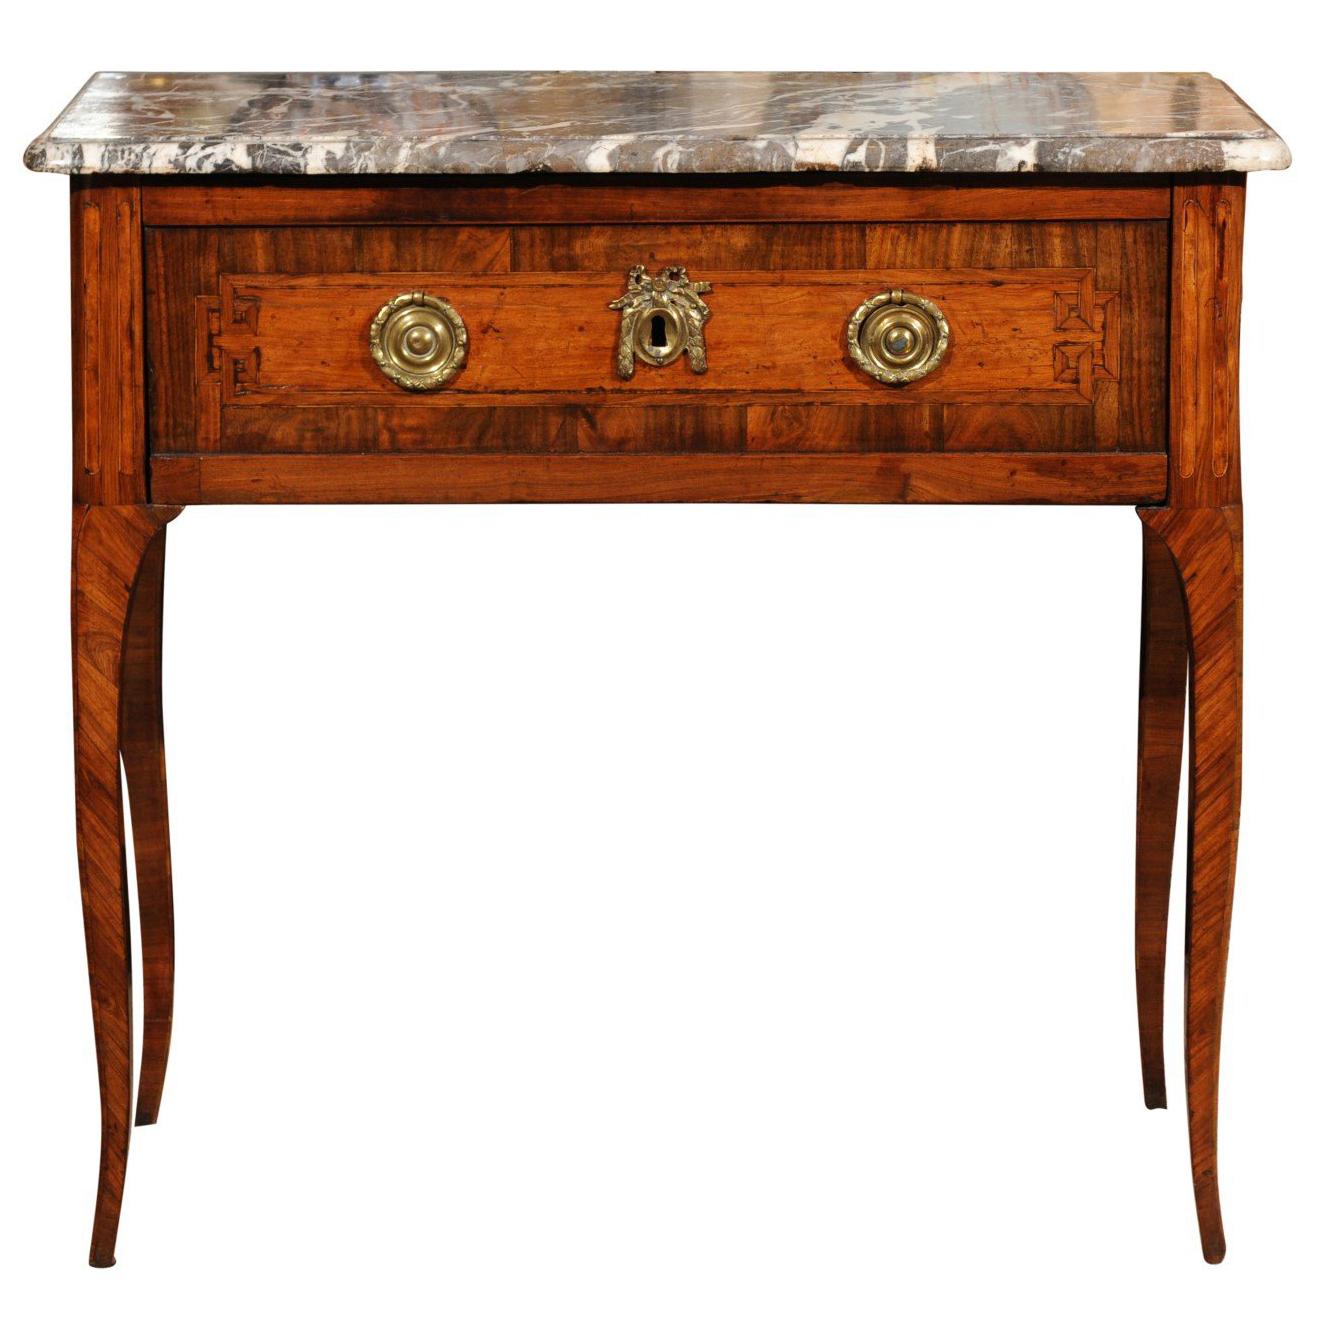 18th Century French Transitional Louis XV/XVI Commode en Console